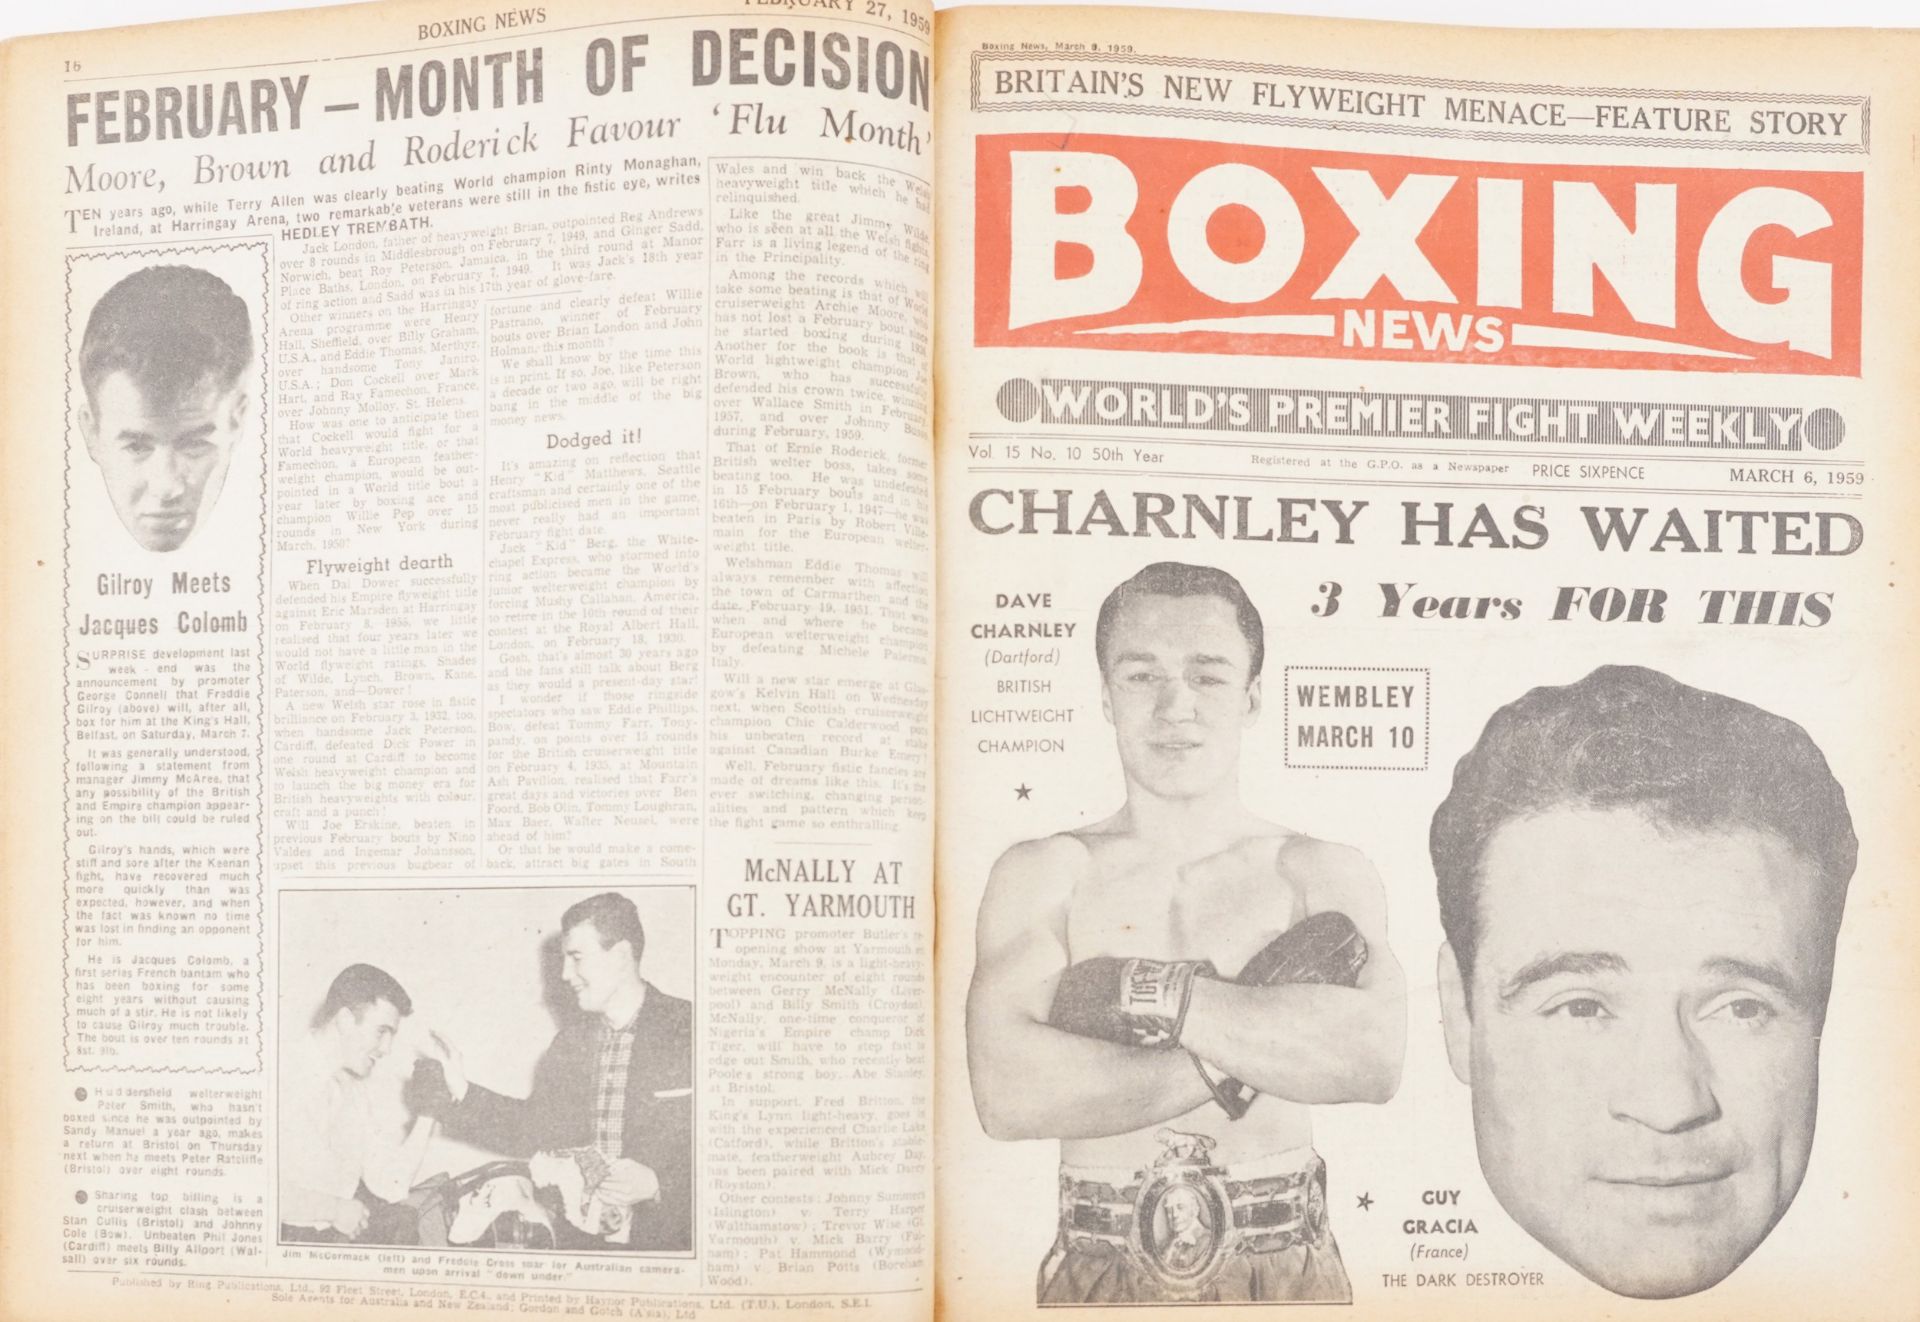 Collection of boxing ephemera including photographs and Boxing News : For further information on - Image 3 of 6